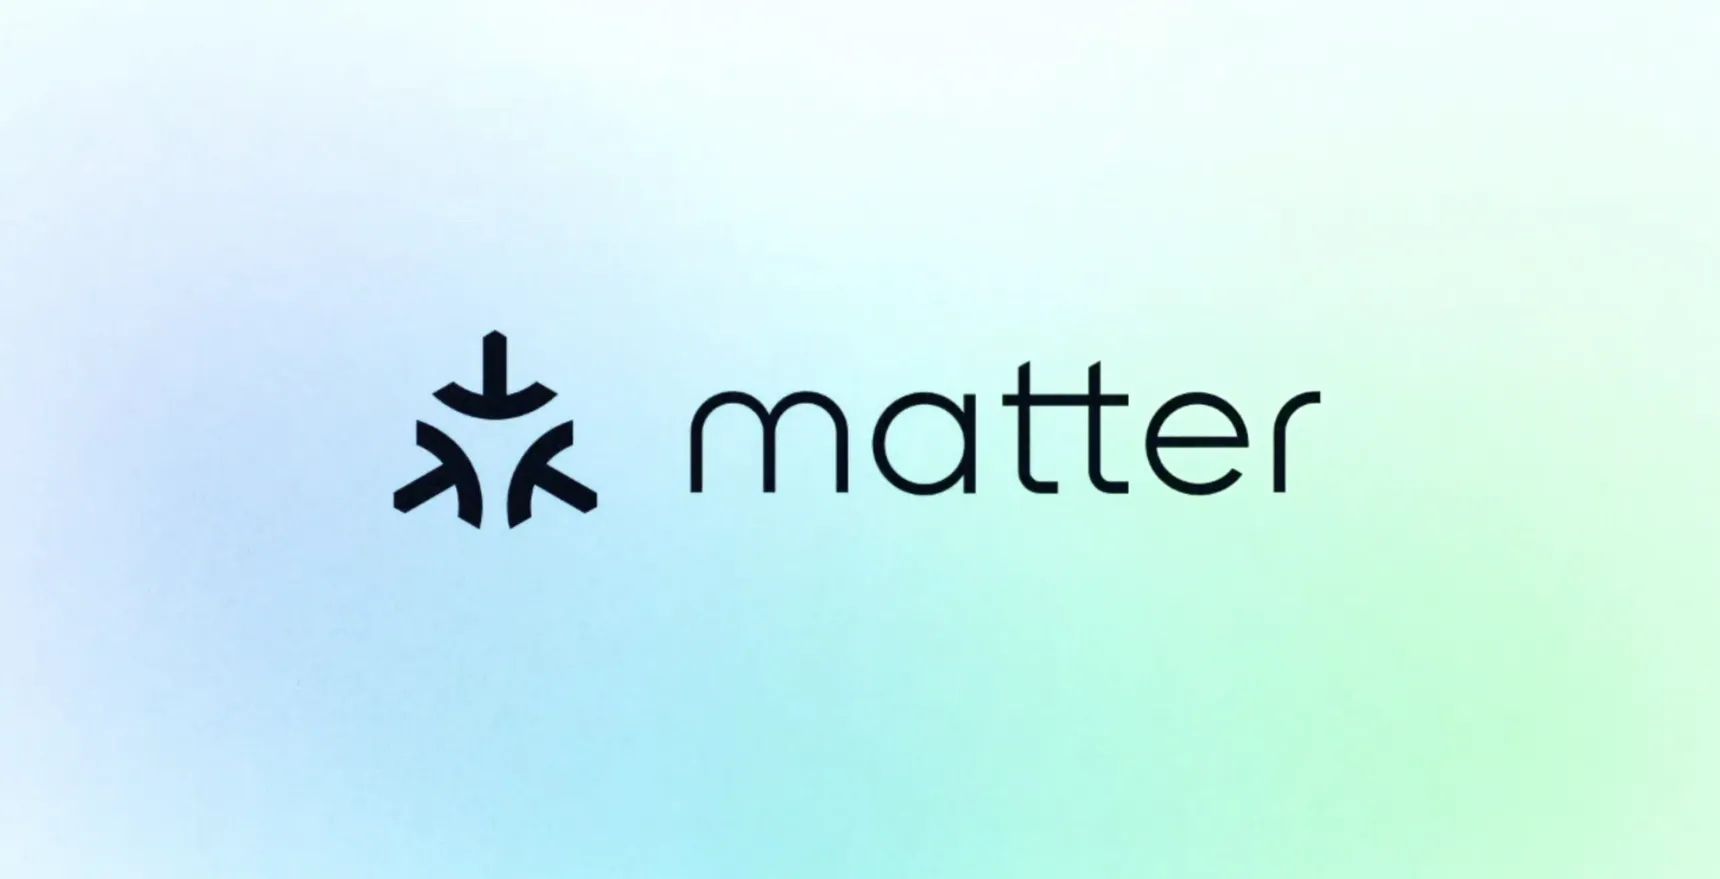 Matter is the new connectivity standard for smart homes.